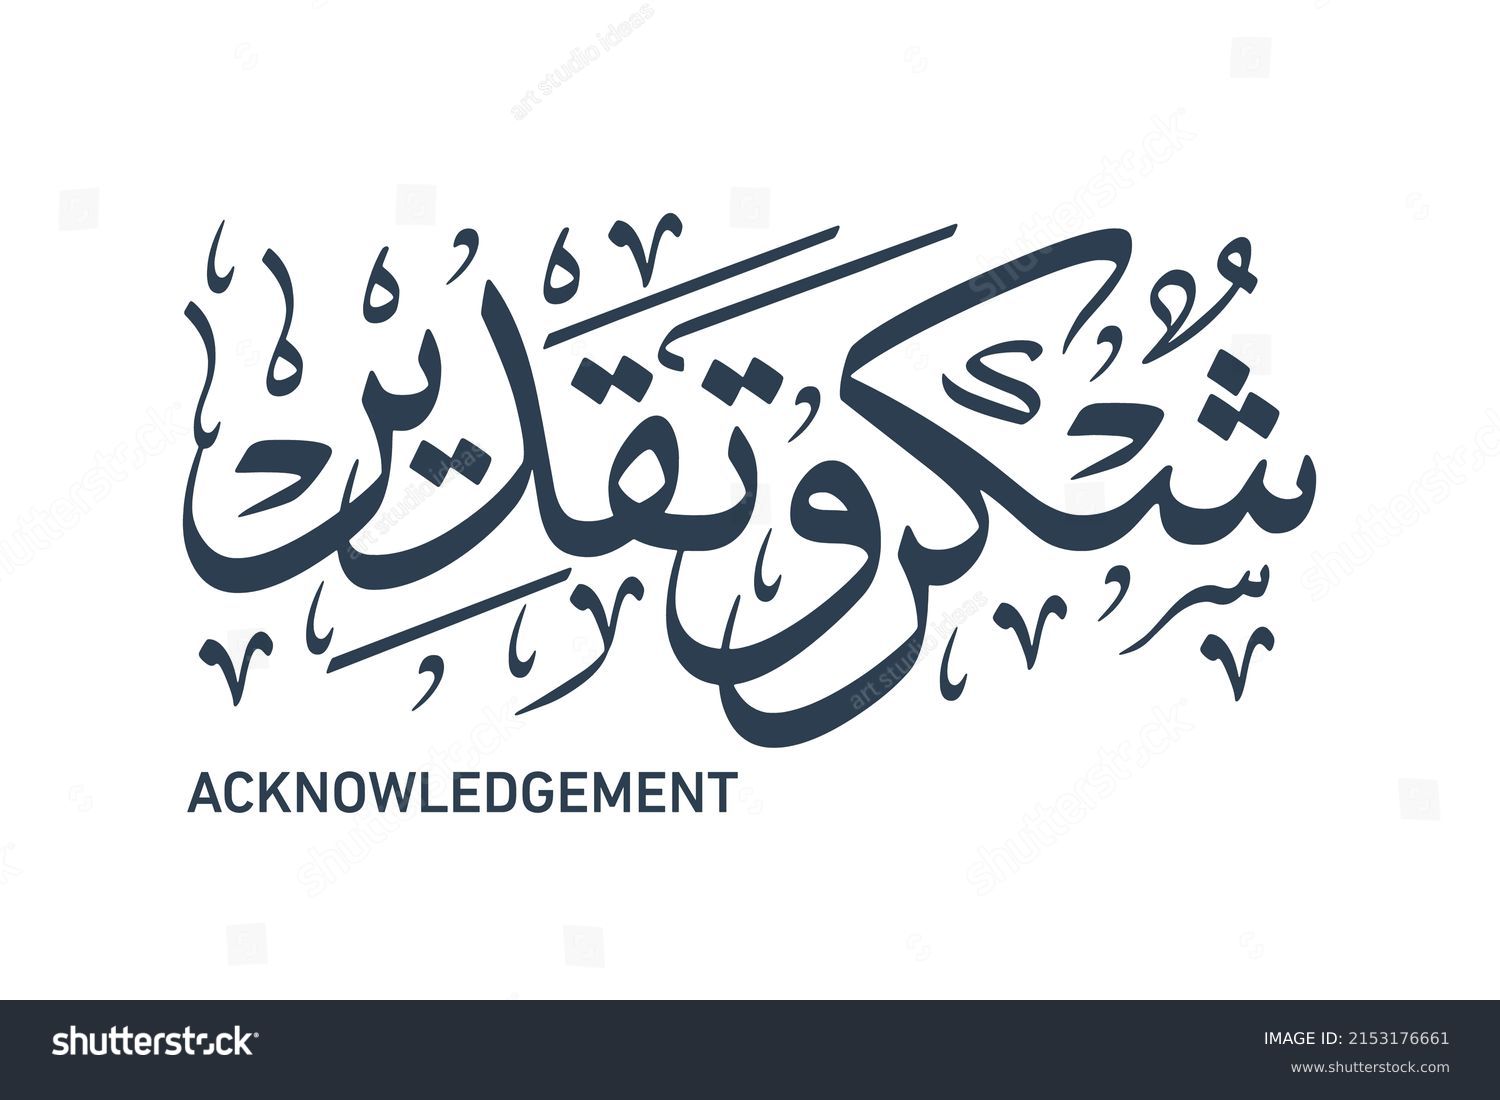 Acknowledgement  appreciation in Creative Arabic Logo Calligraphy. translated as 'Thank you very much' Arkistovektorikuva